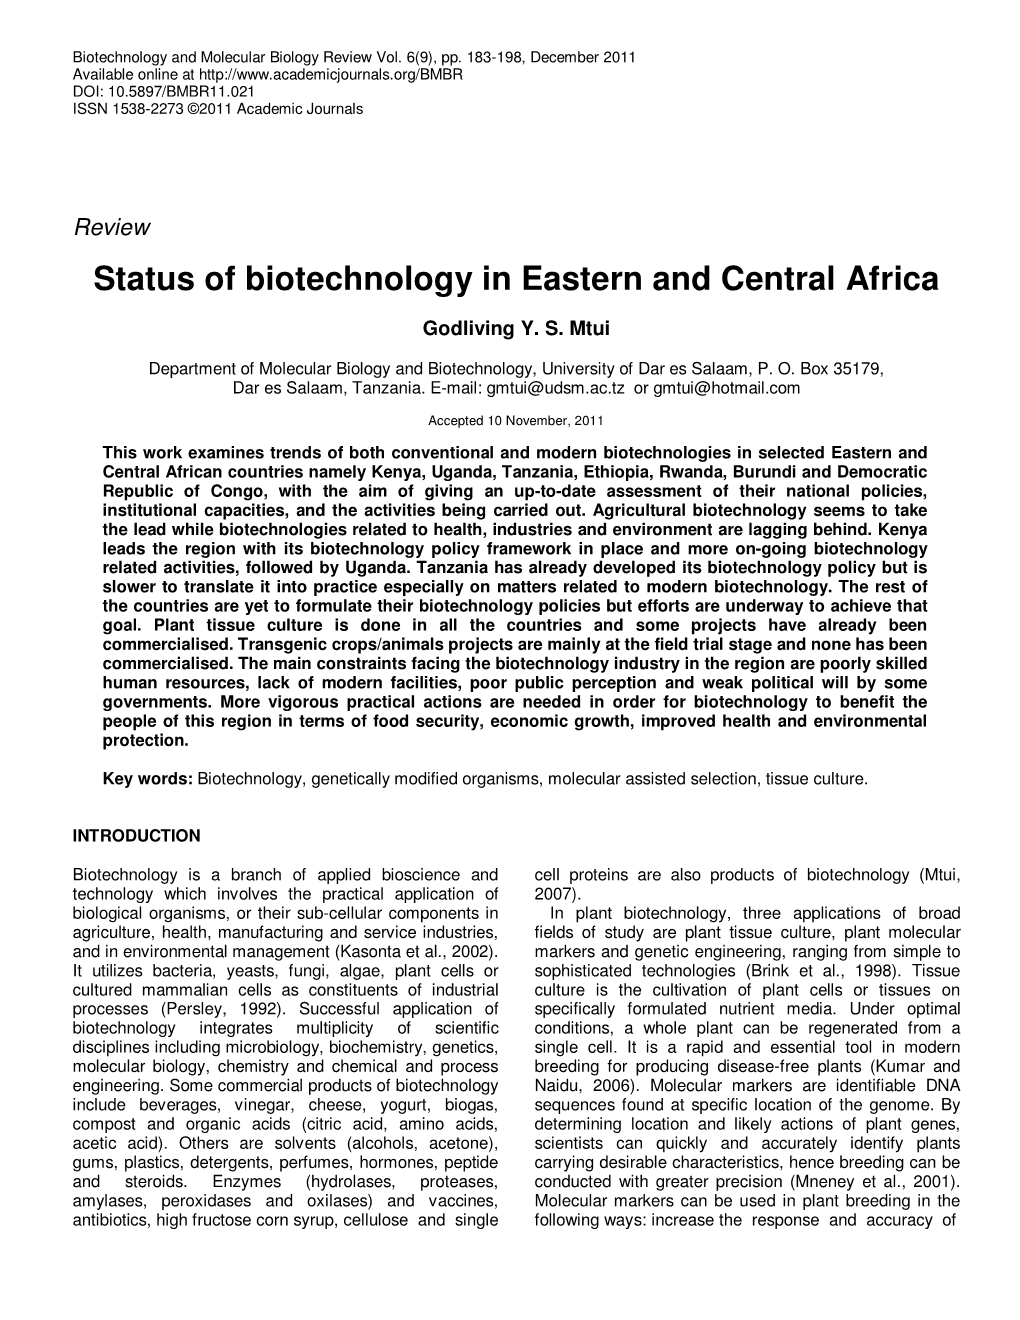 Status of Biotechnology in Eastern and Central Africa